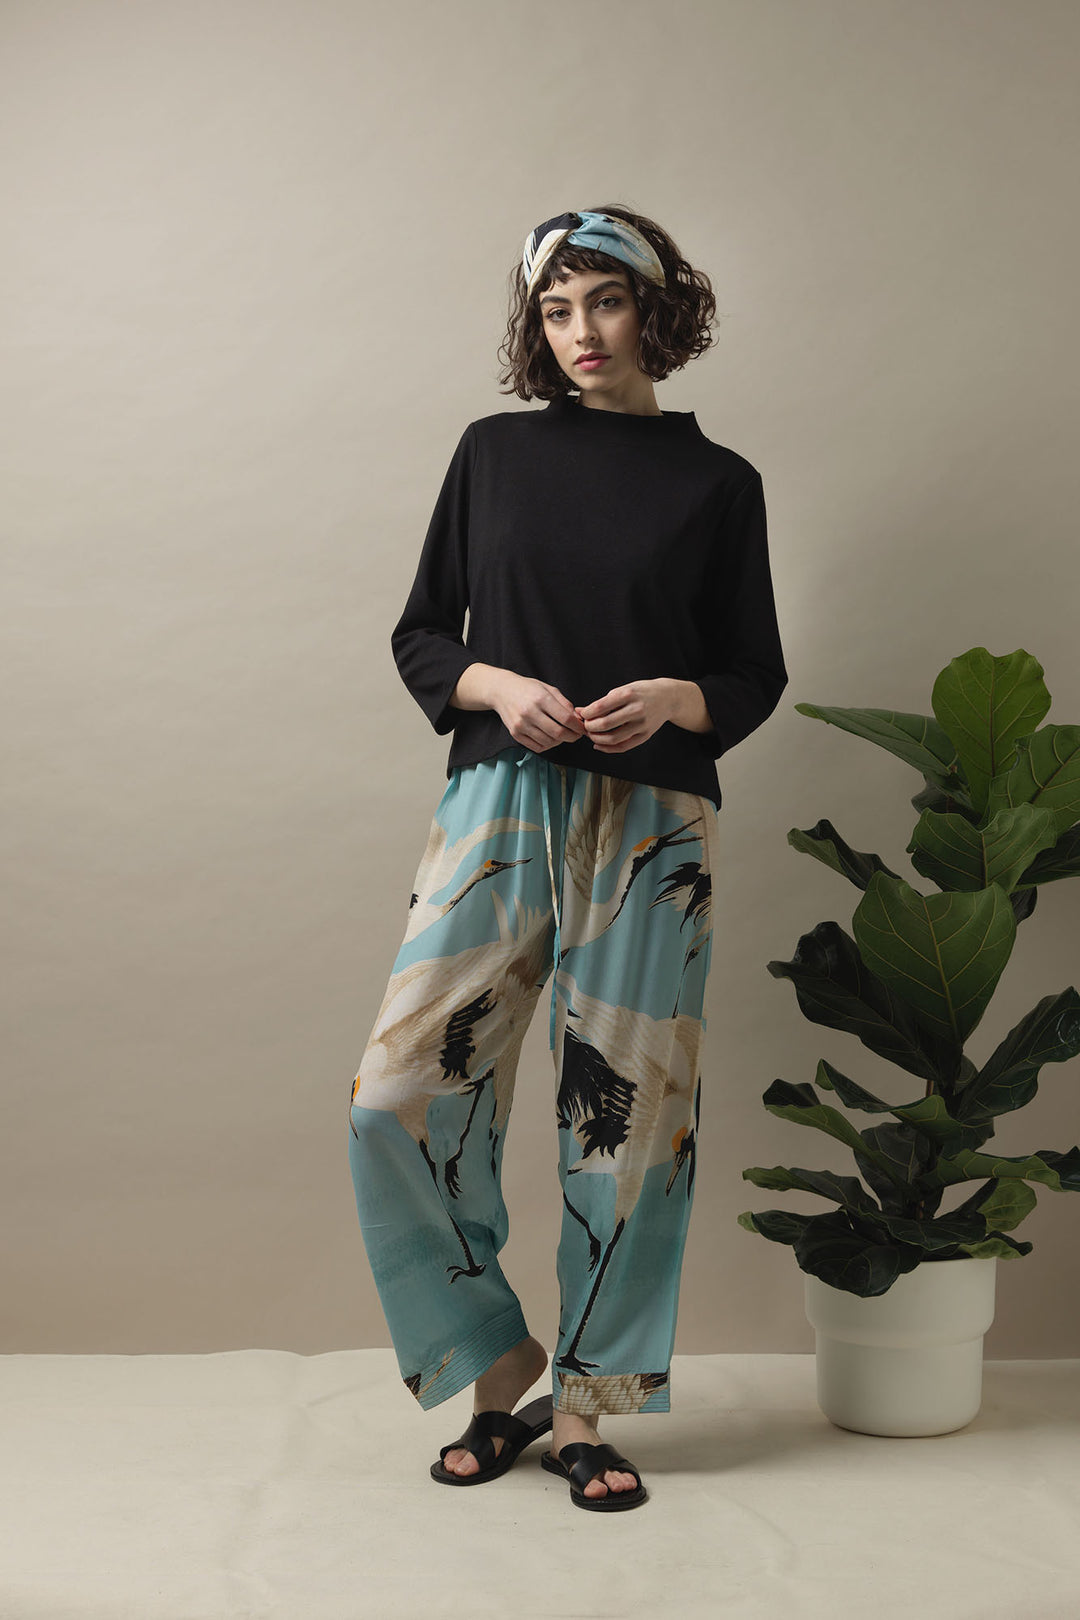 The One Hundred Stars Stork Sky Blue Crepe Lounge Pants are styled here with a black jumper and black sandals, plus accessorised with a Stork Sky Blue Headband. Creating a luxurious but comfortable day look. 